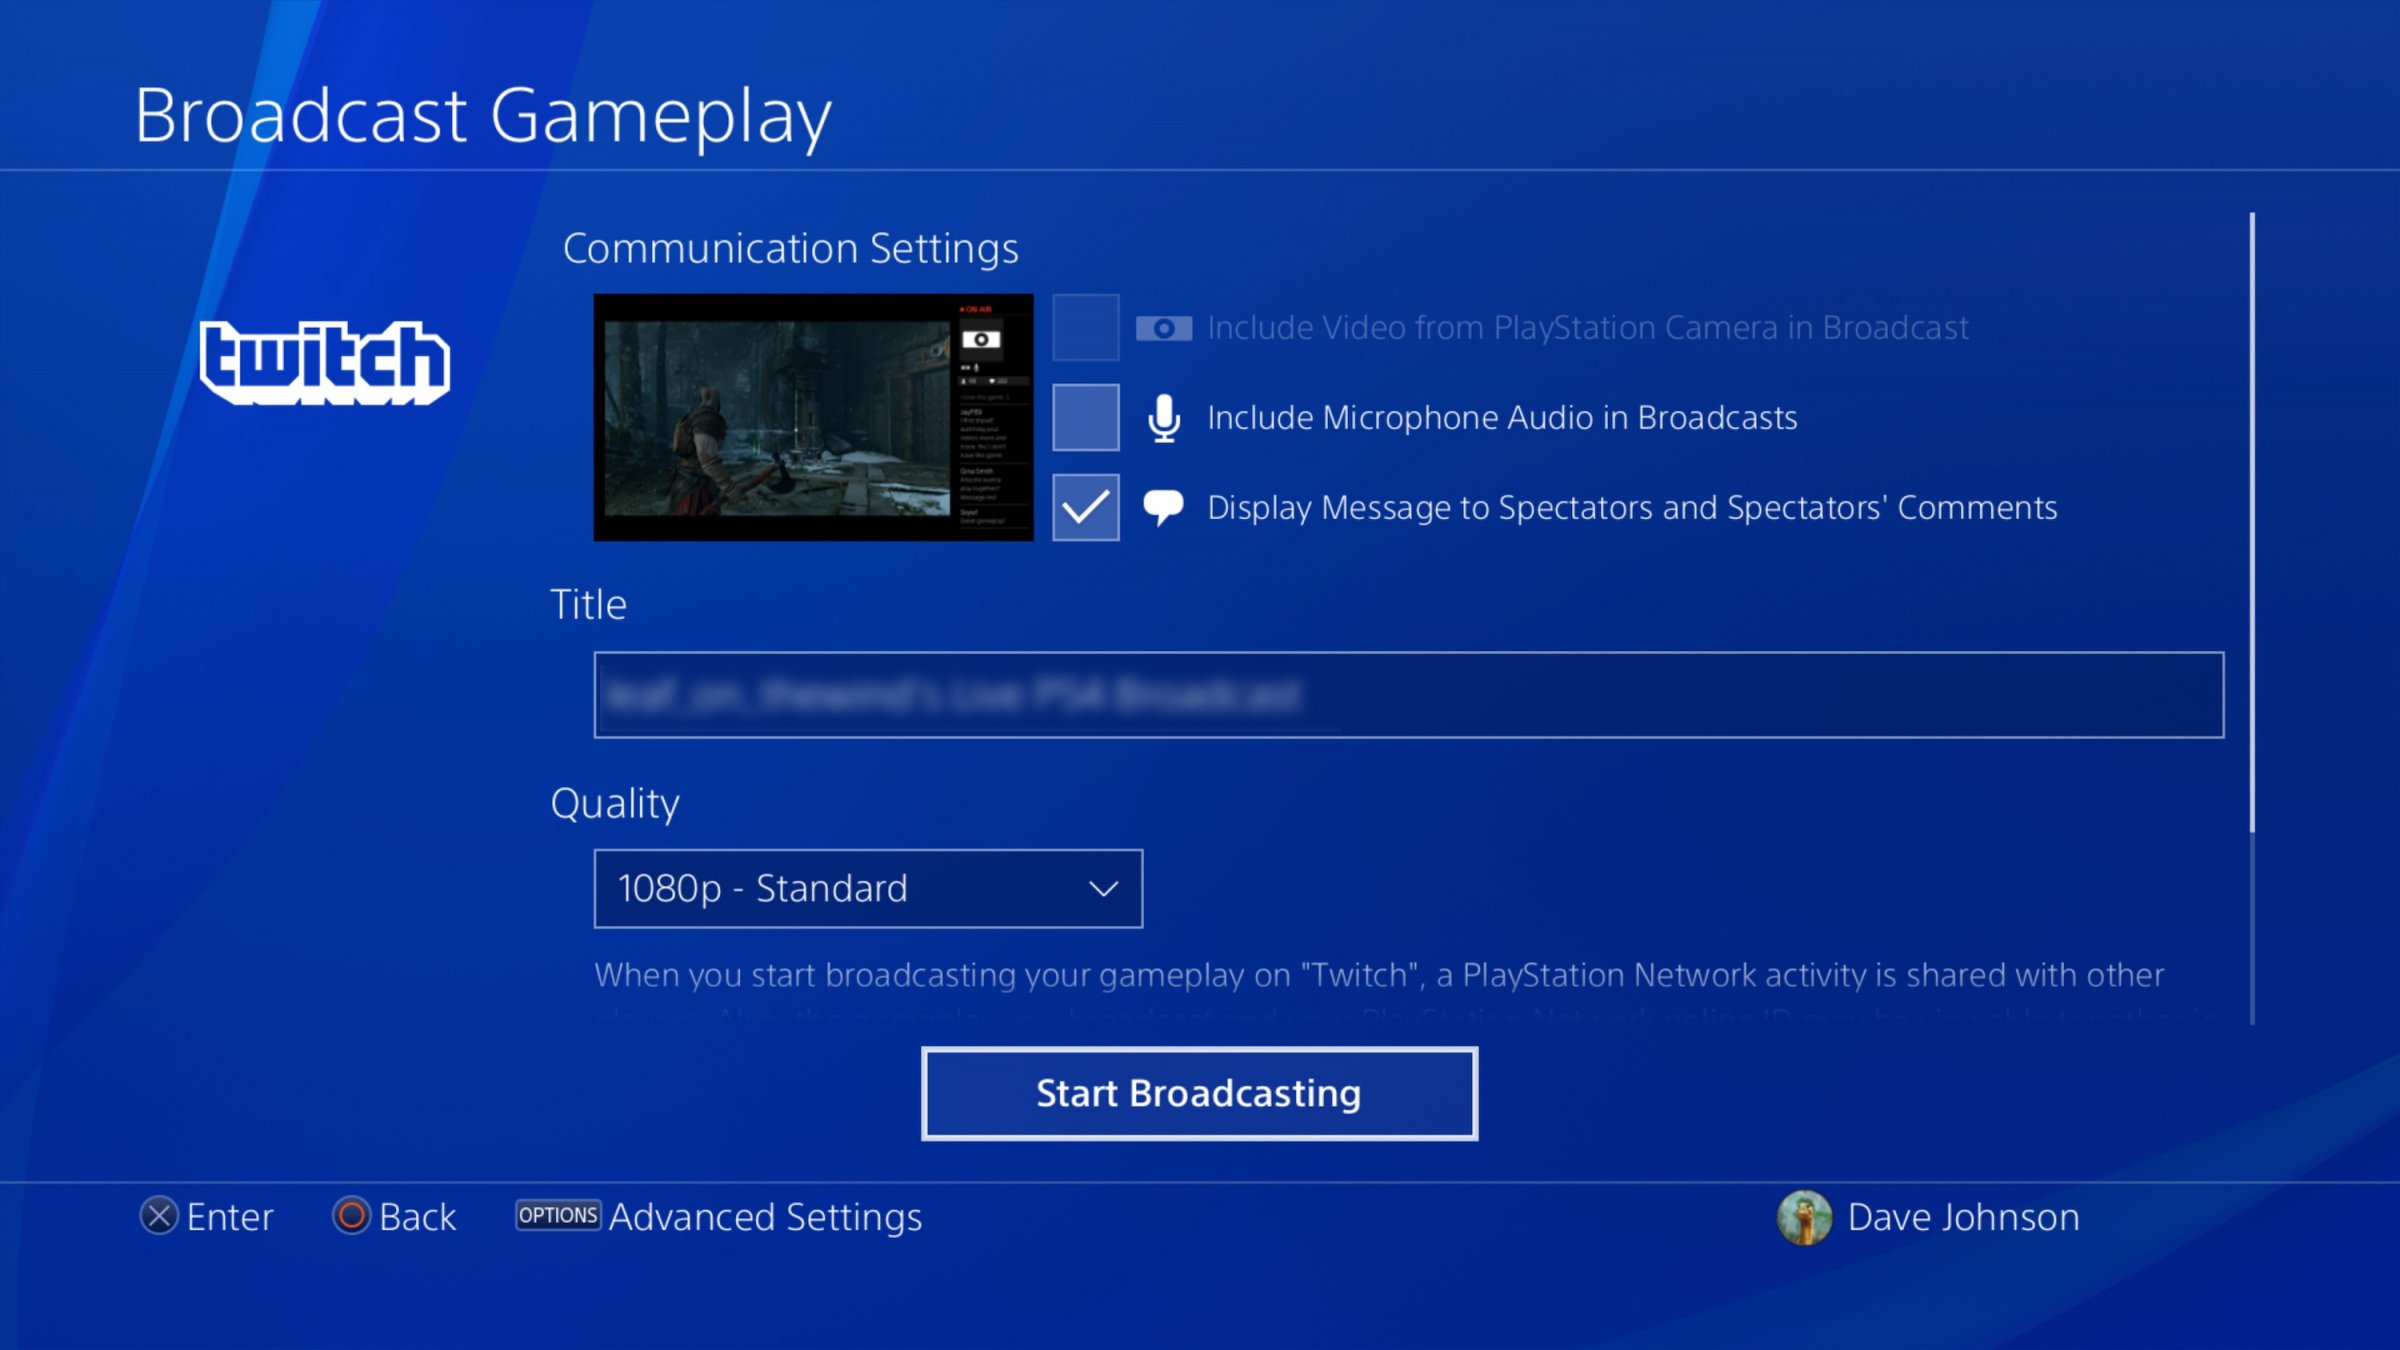 Press the Share button to see the pop-up share menu. Choose 'Broadcast Gameplay'.